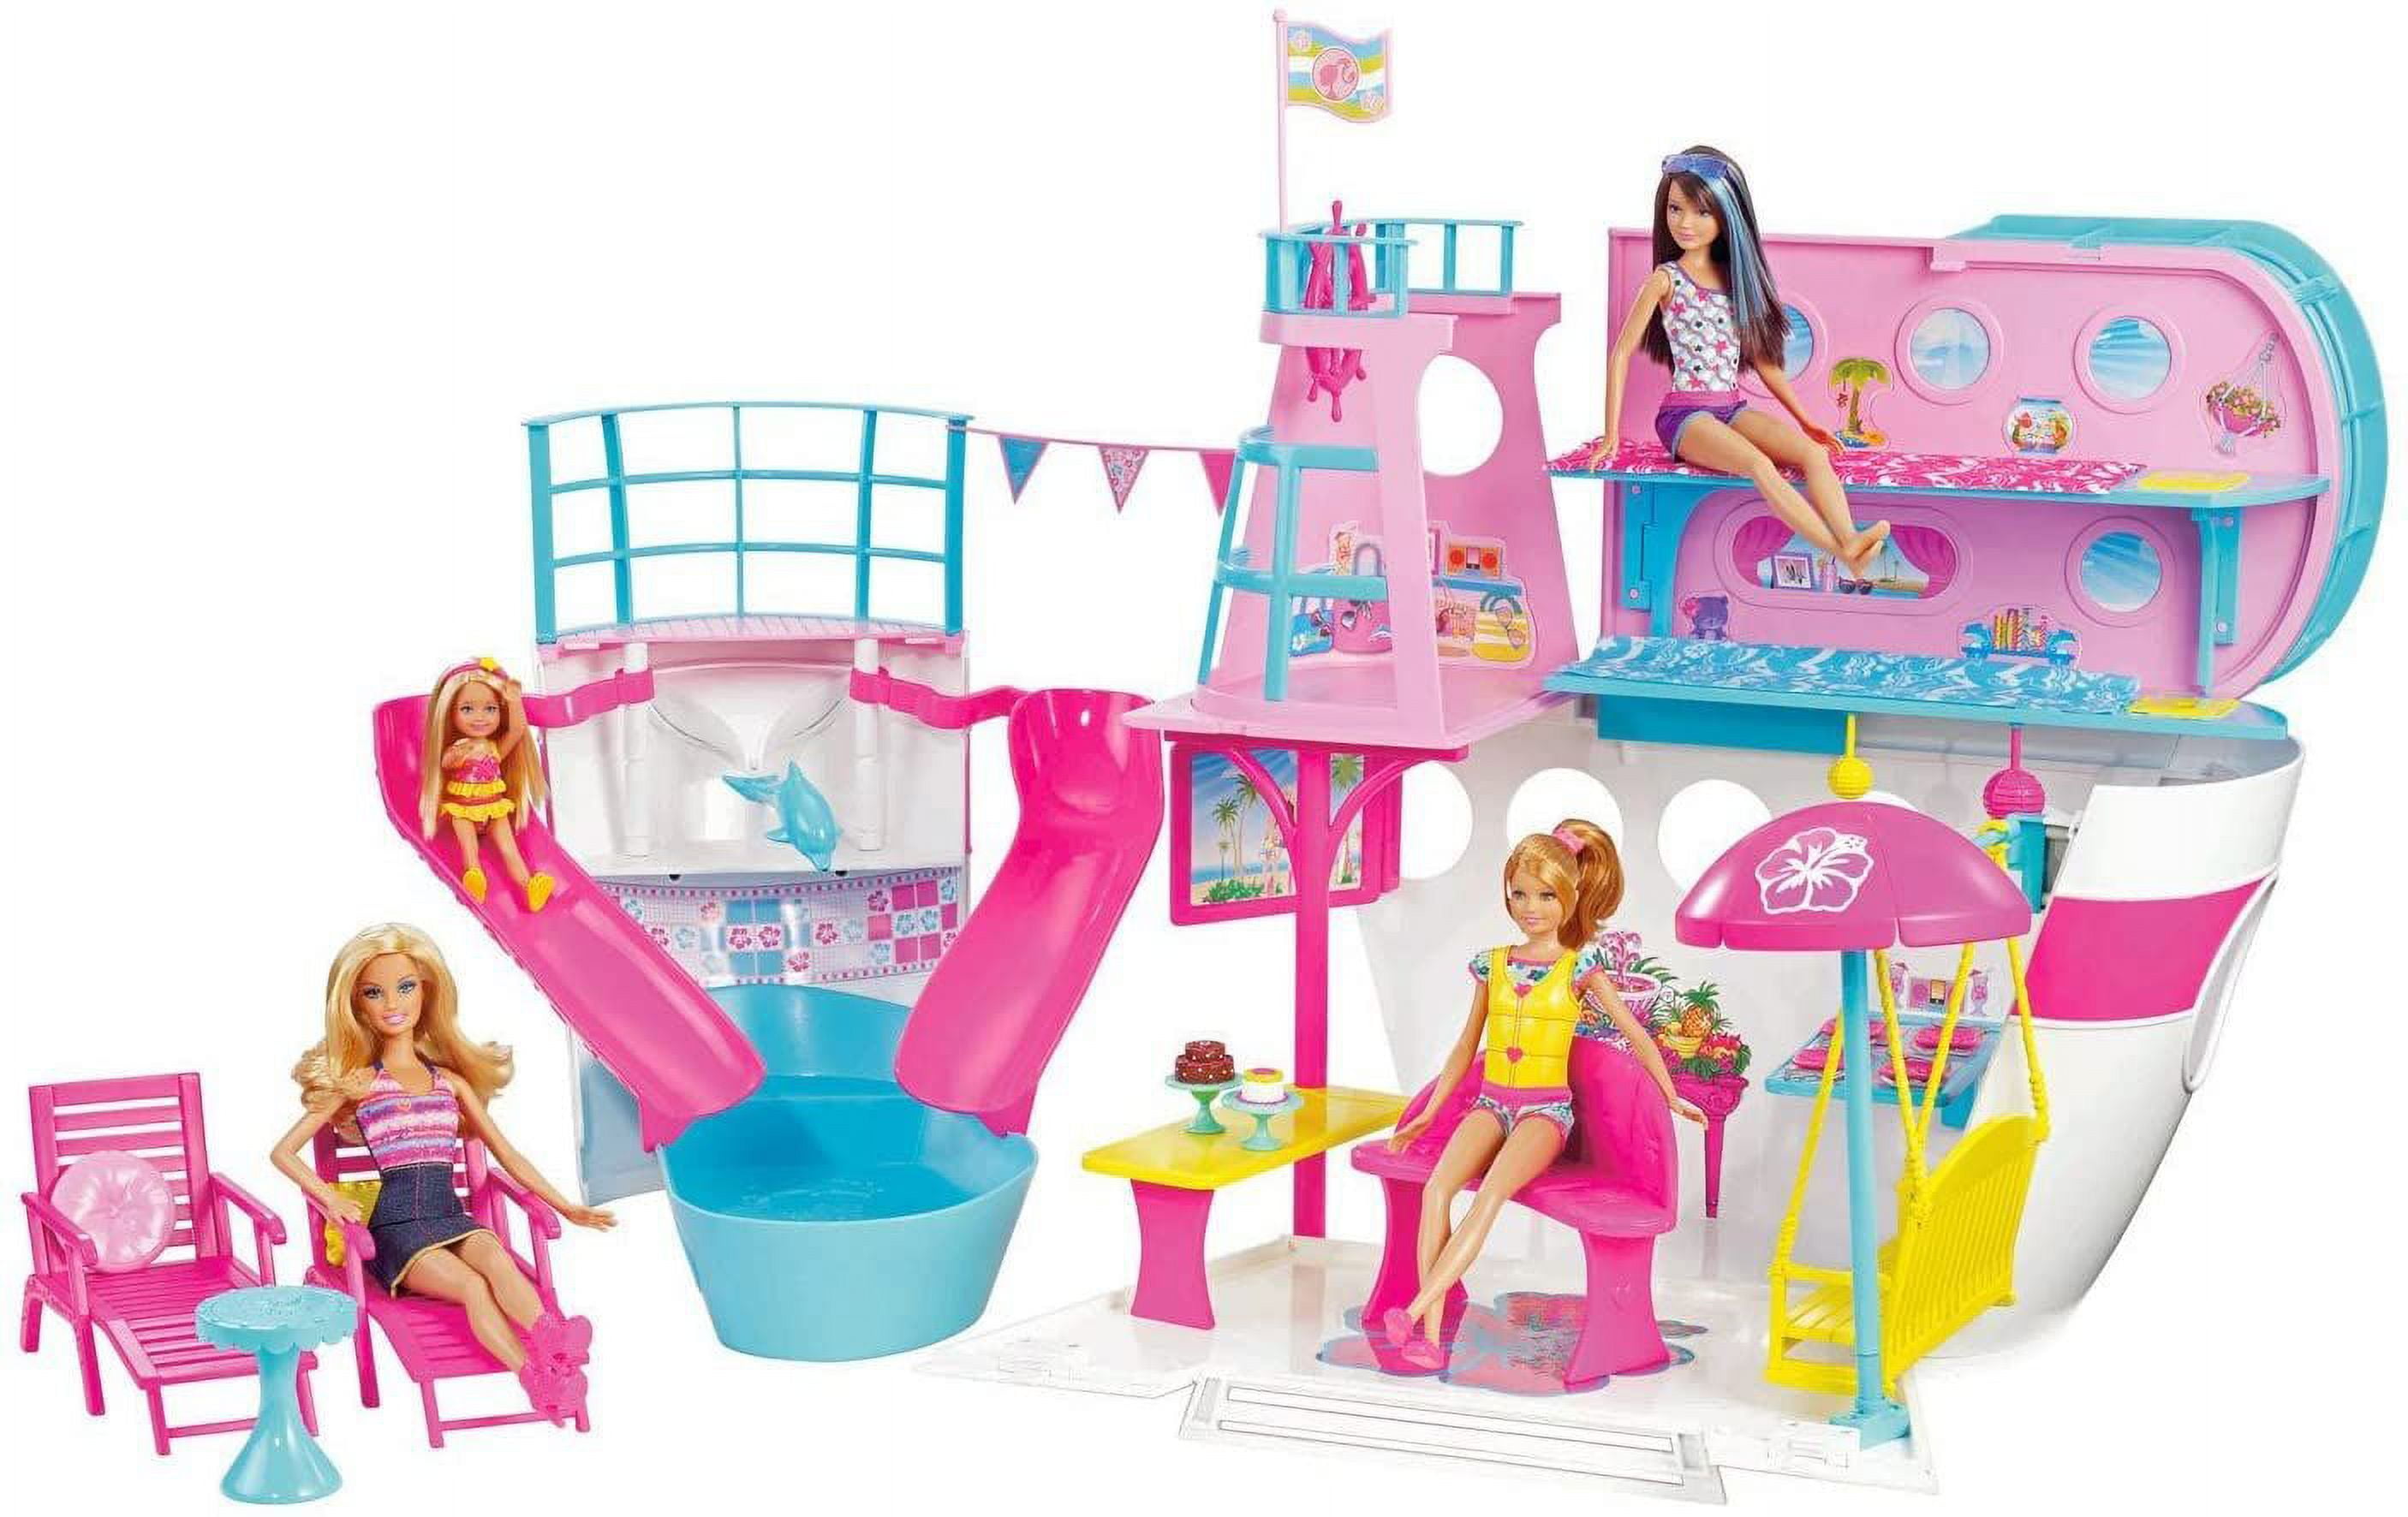 Barbie Boat Cruise with Fangirl Fantasy Ticket Giveaway